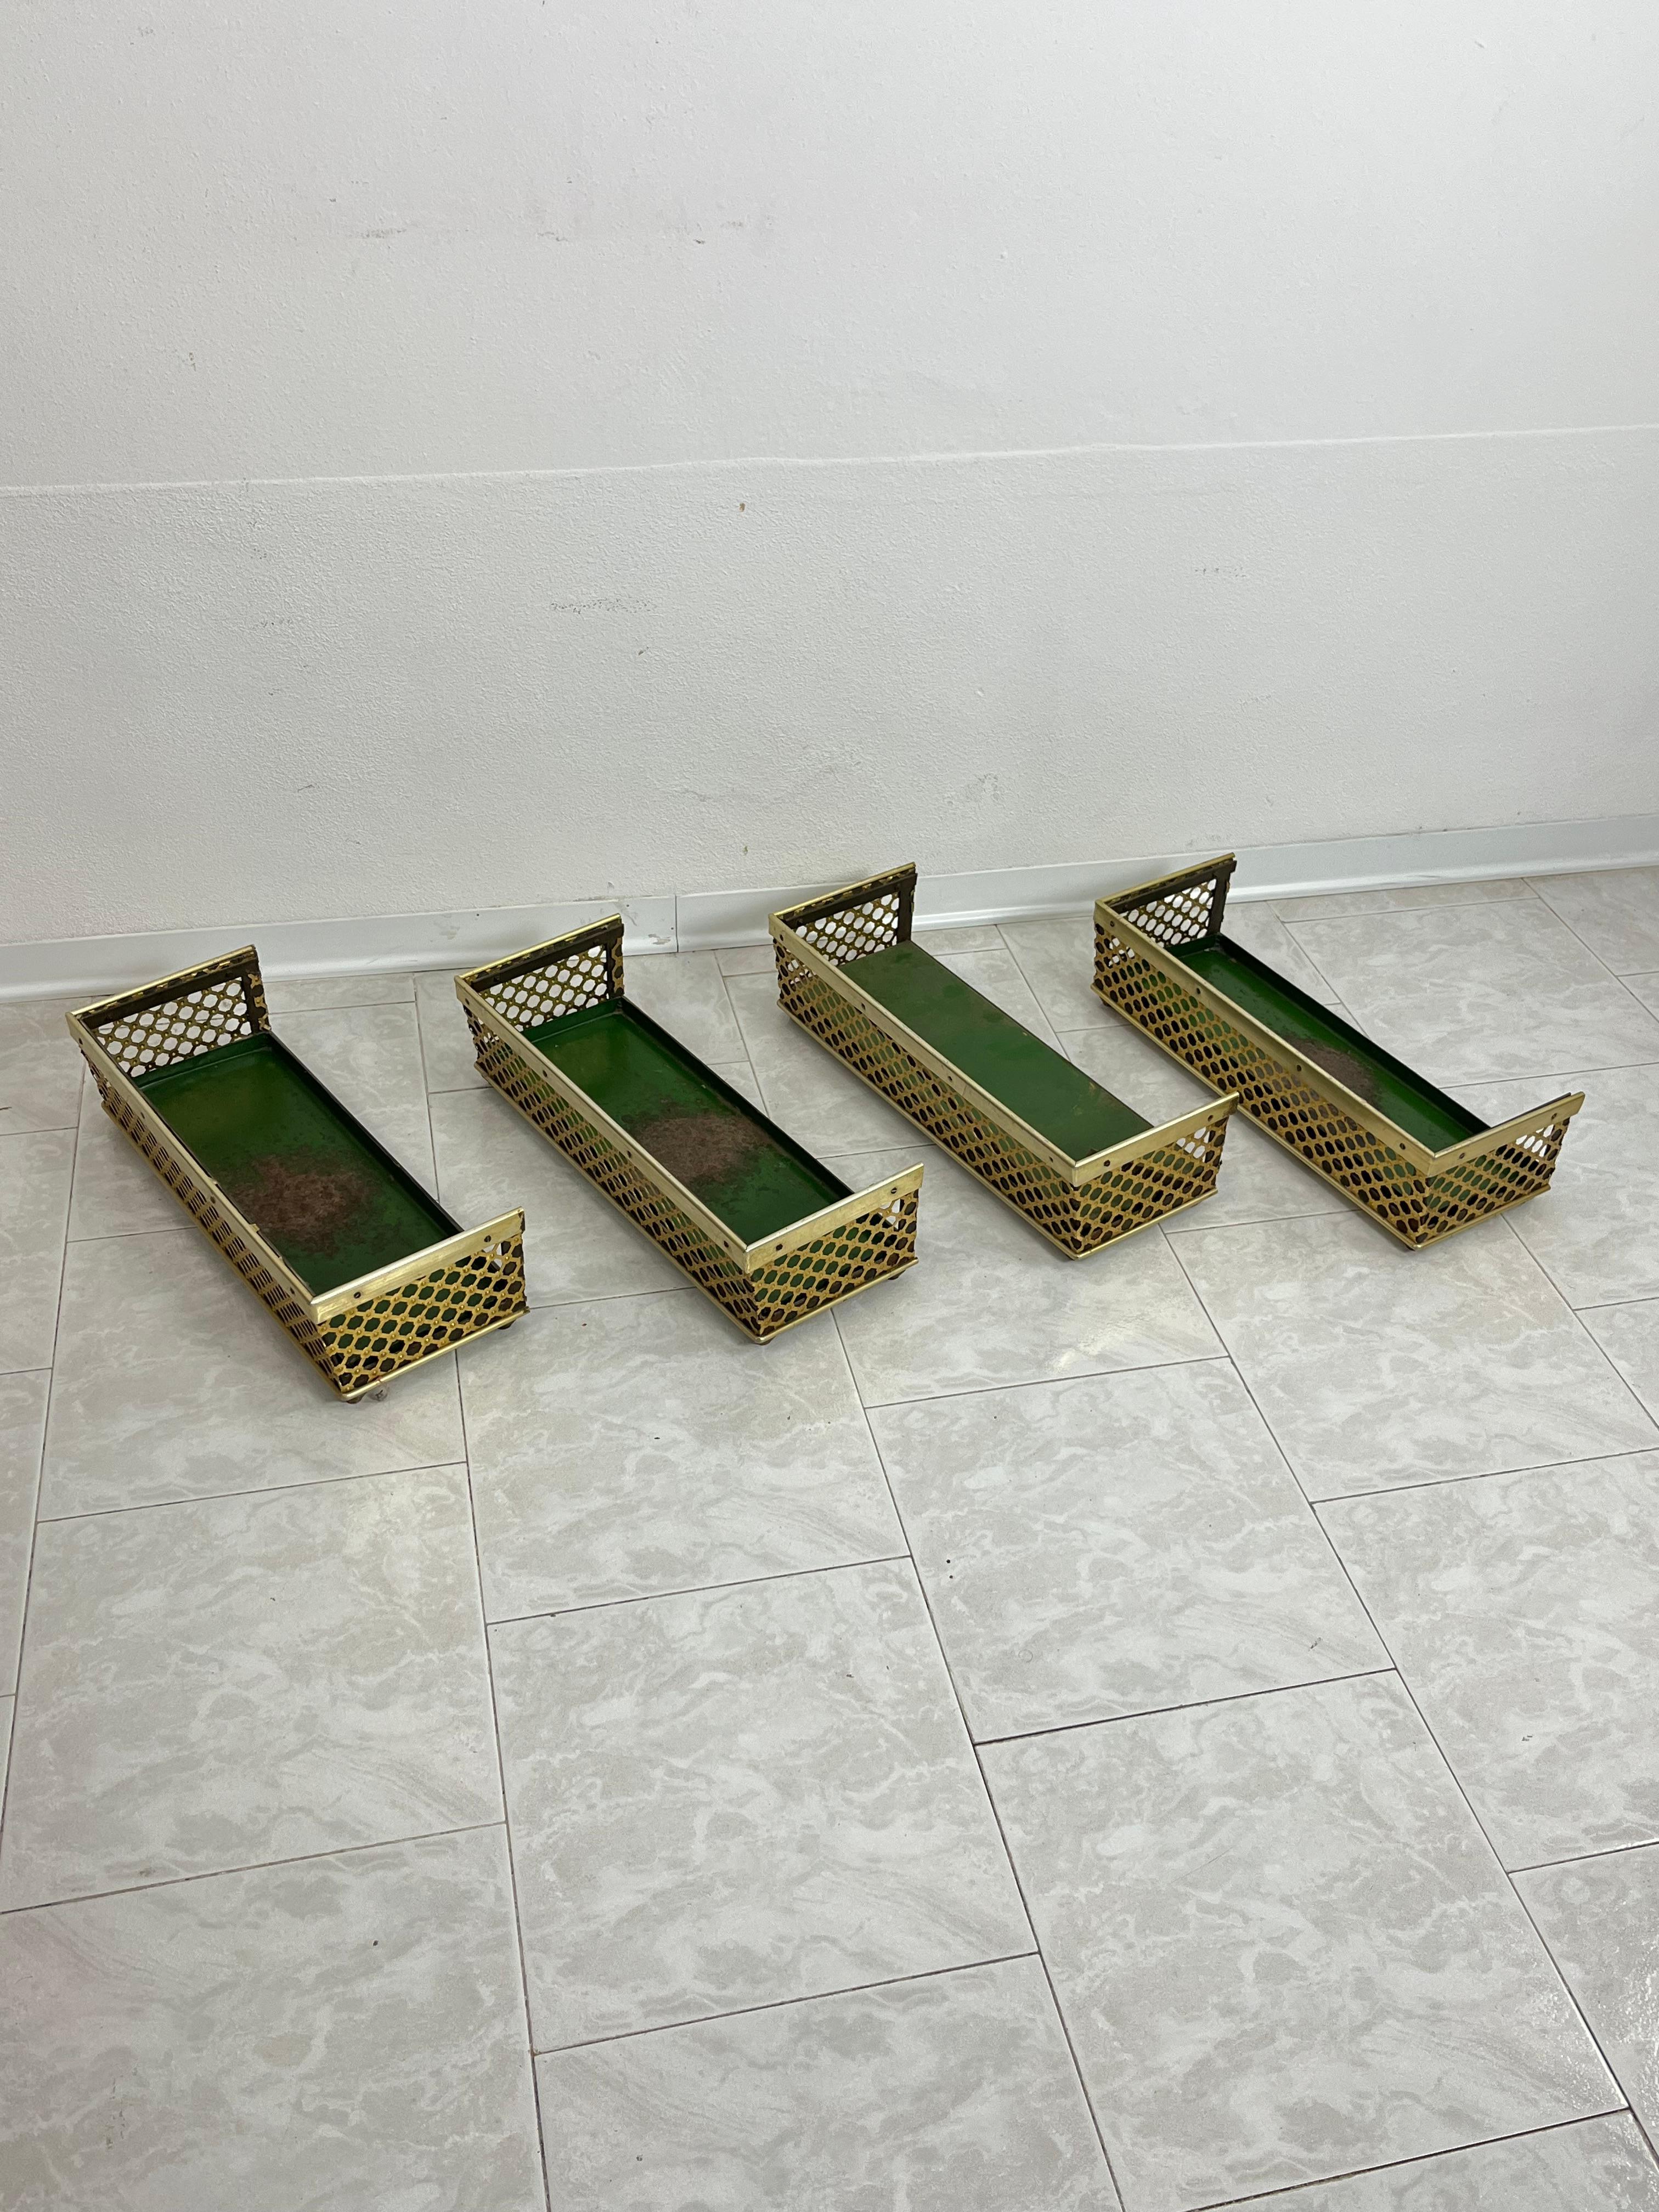 Metal Set of 4 Mid-Century Brass-Covered Planters Attributed to Gio Ponti 1950s For Sale